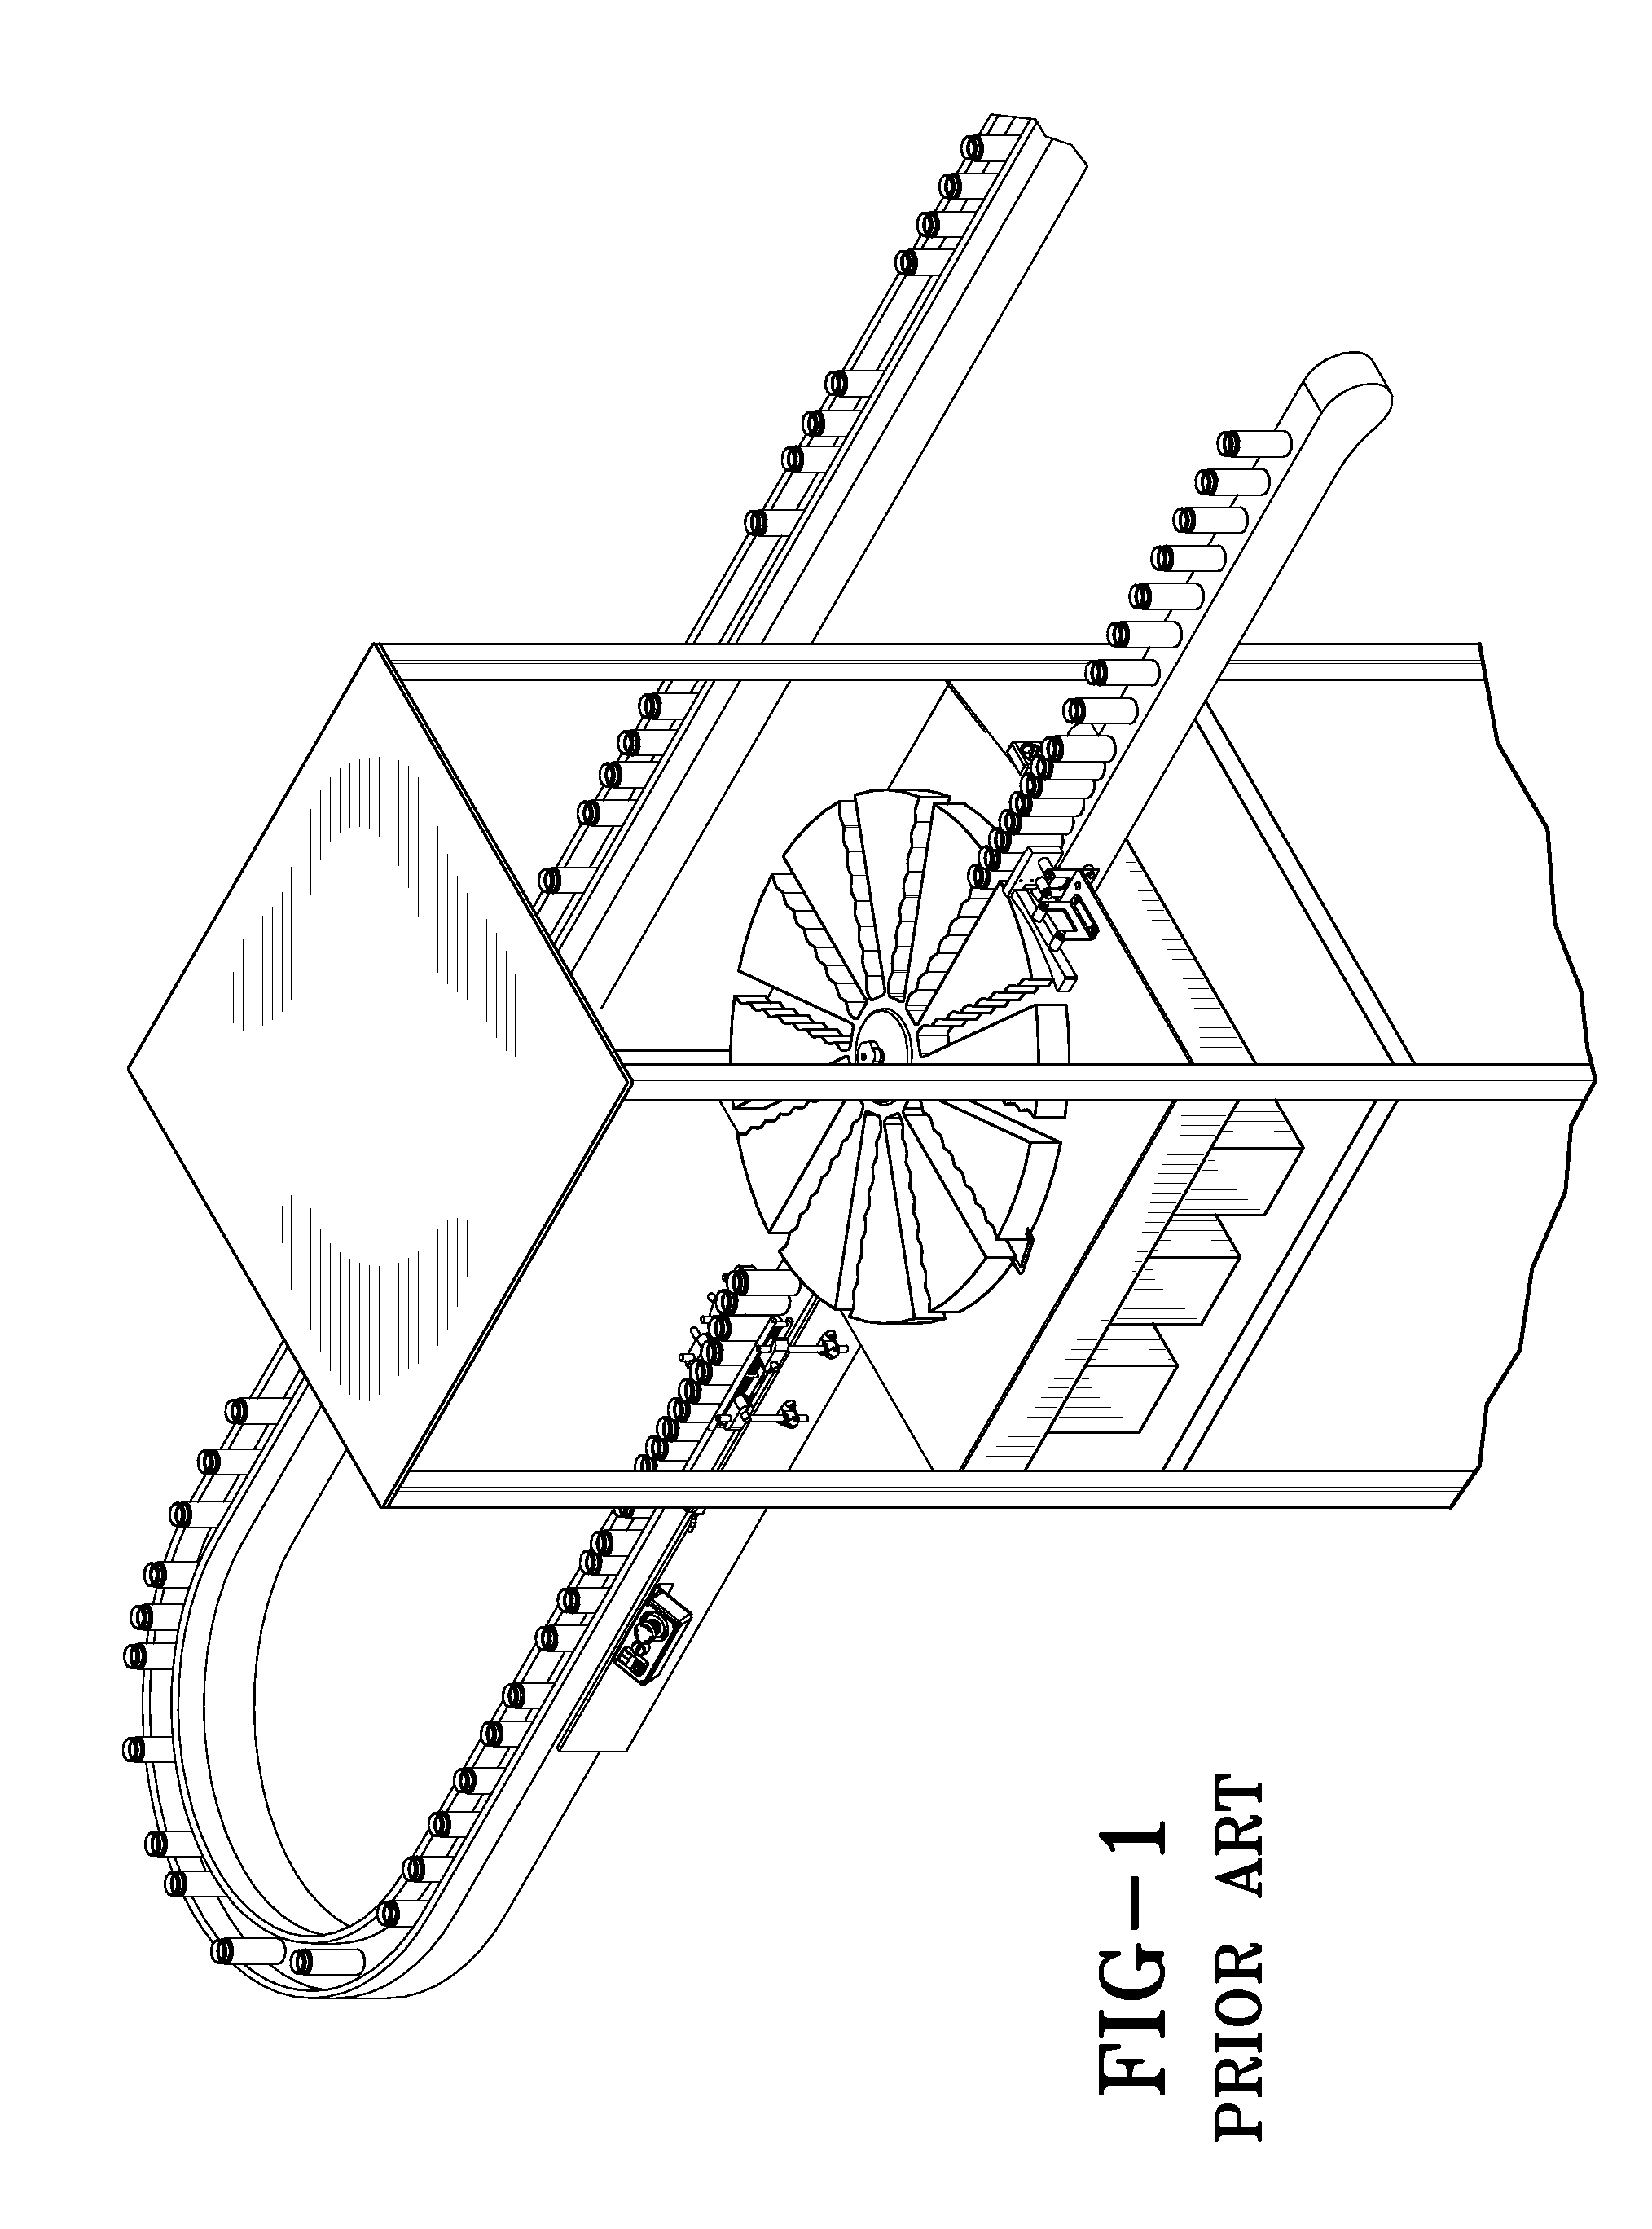 Intermittent motion checkweigher with offset product pockets